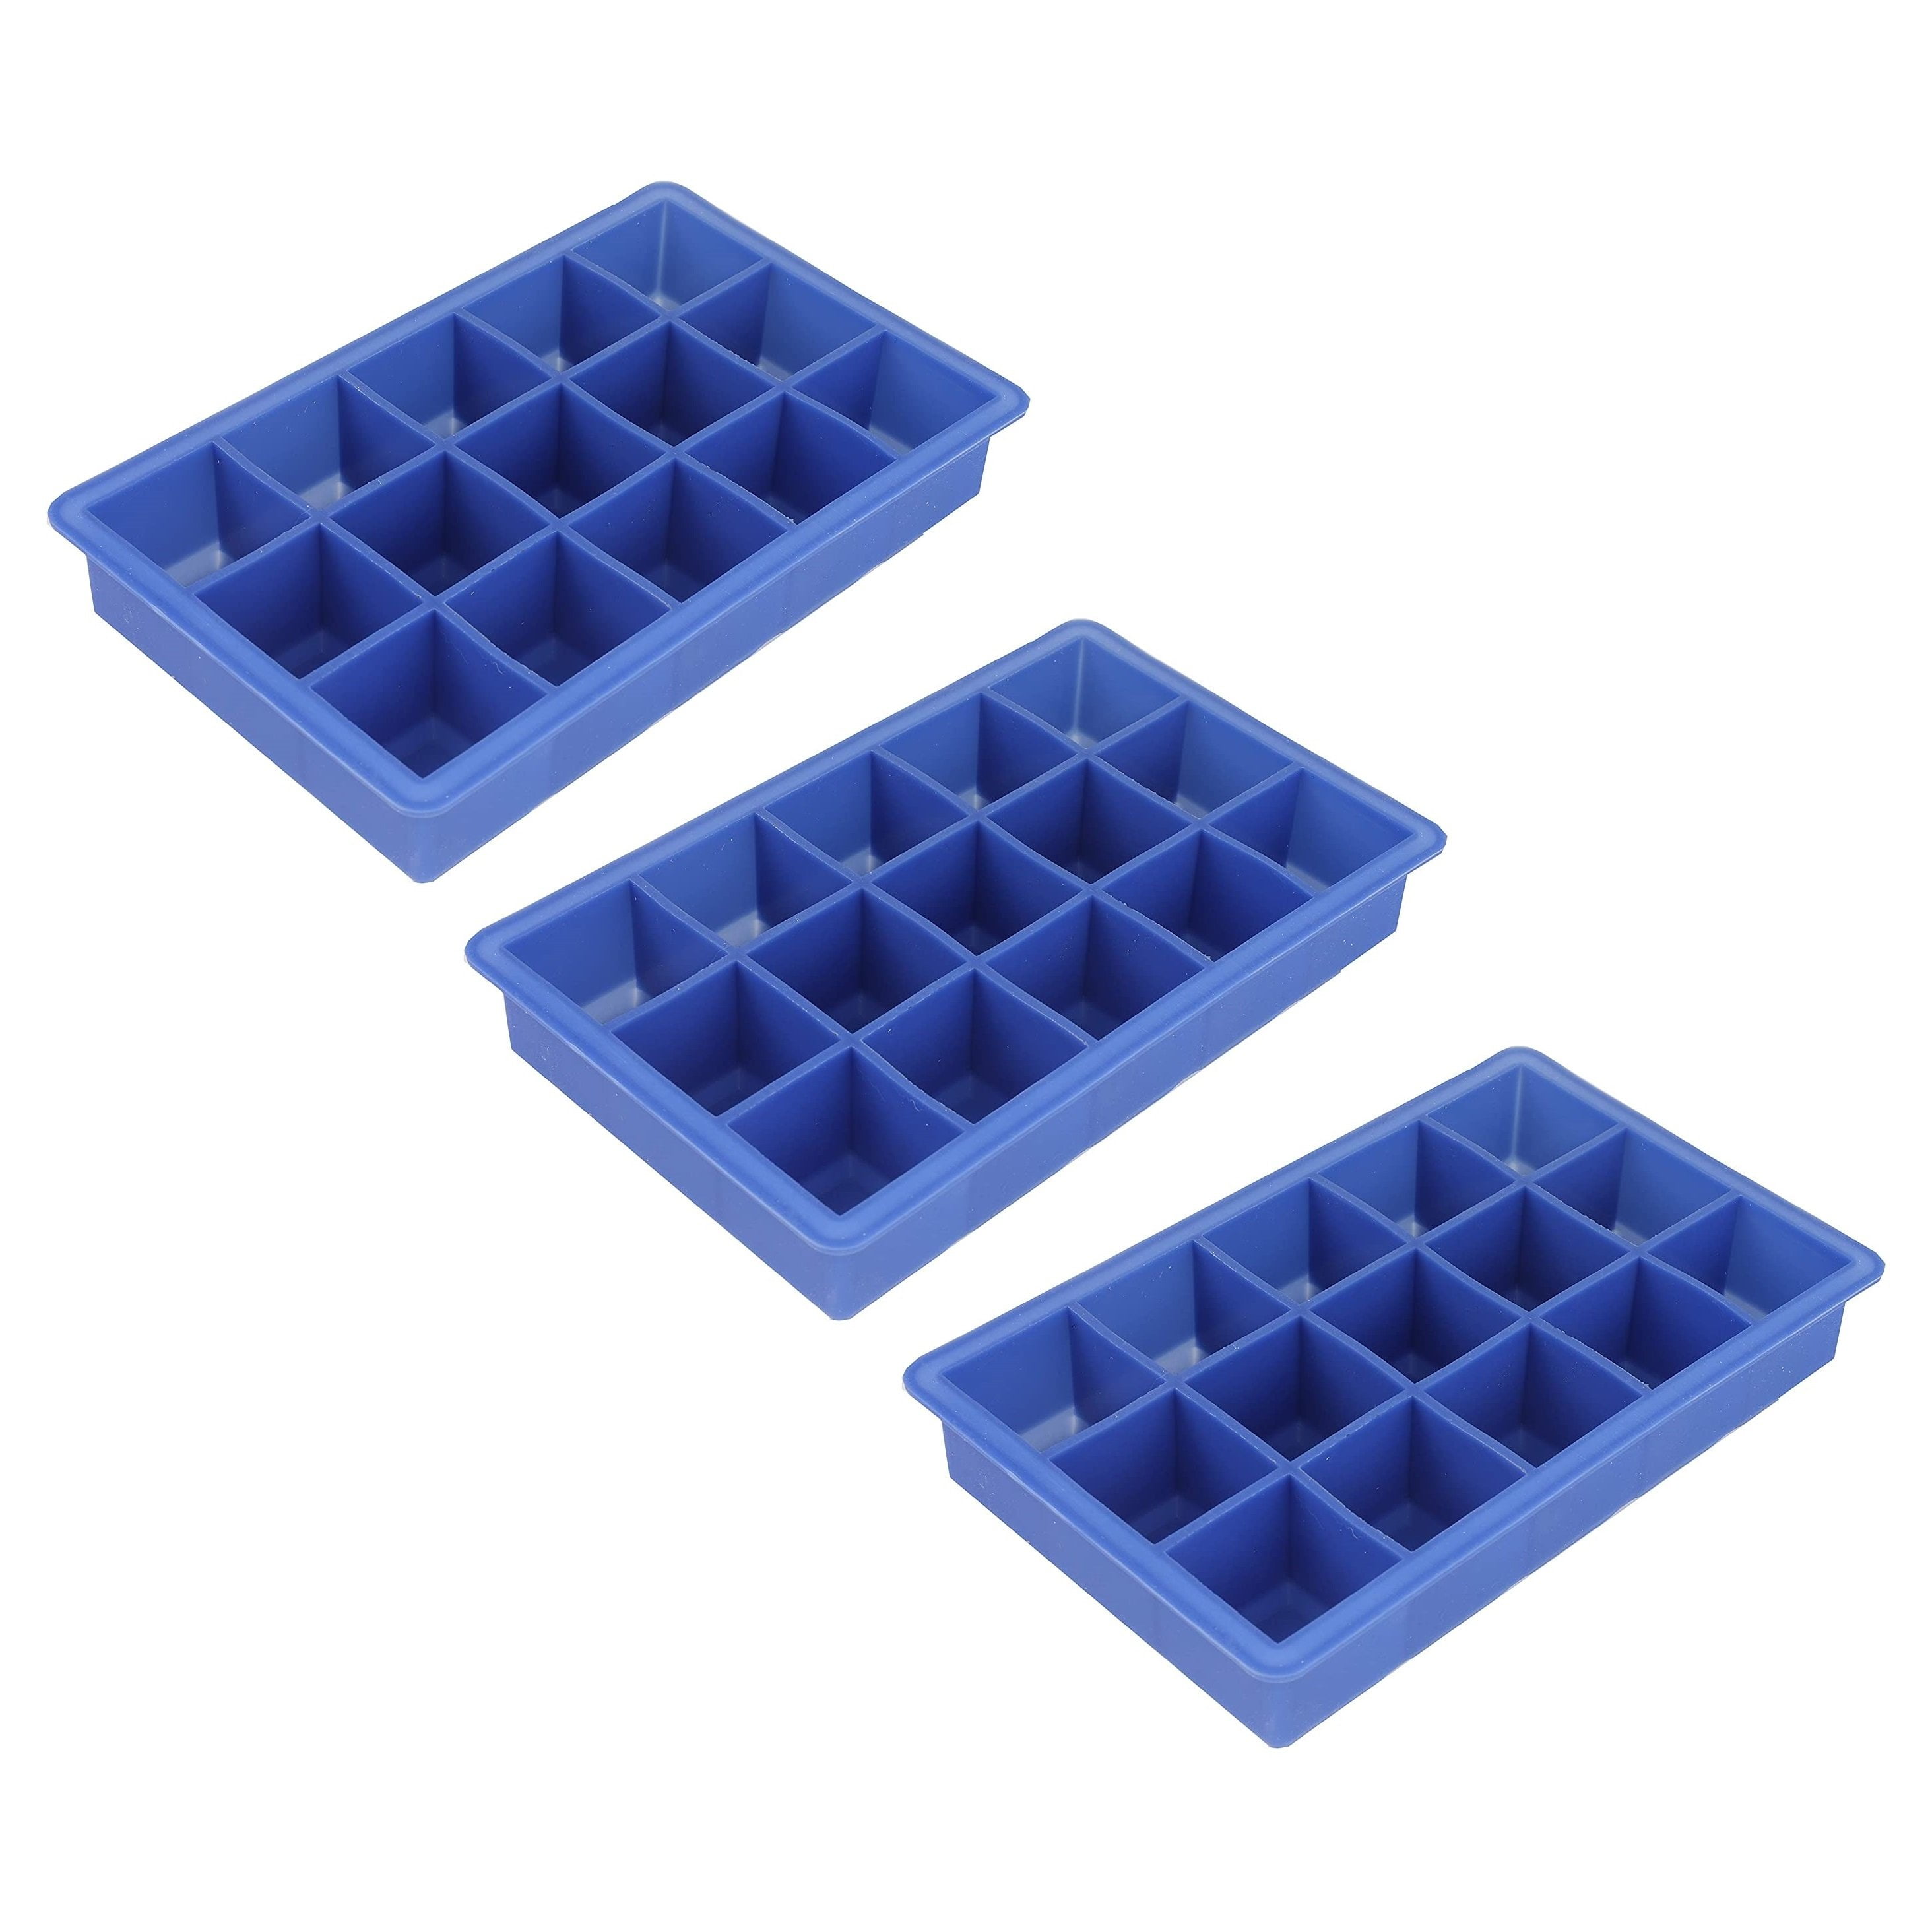 Restaurantware 1.25-Inch Ice Cube Tray - Makes 15 Cubes: Perfect for Commercial Bars or Home Use - Constructed from Durable Black Silicone - Dishwasher Safe - 1-ct